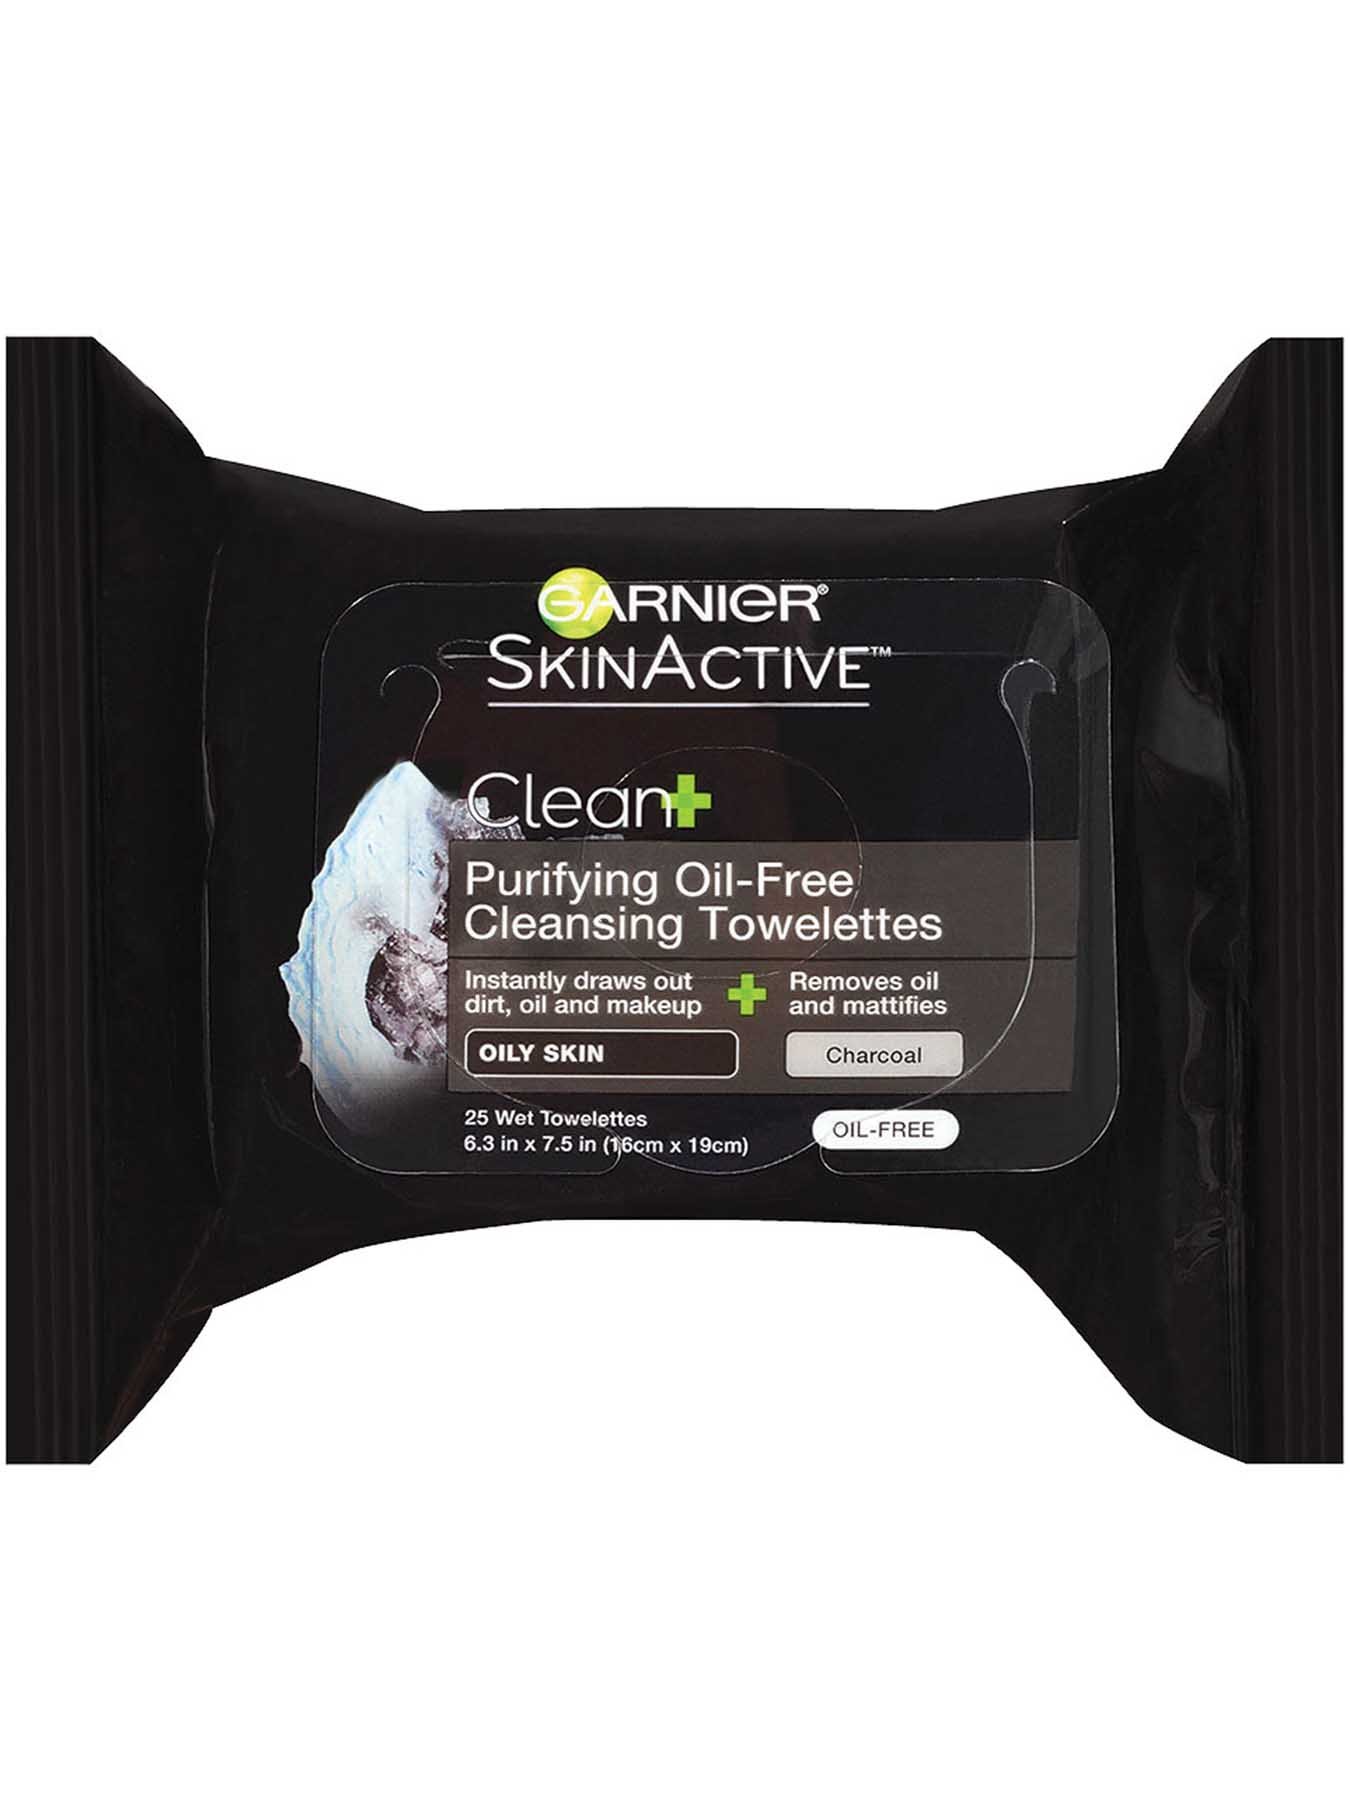 Front view of Clean+ Purify Oil-Free Cleansing Towelettes, Oily Skin, Oil-Free Charcoal.